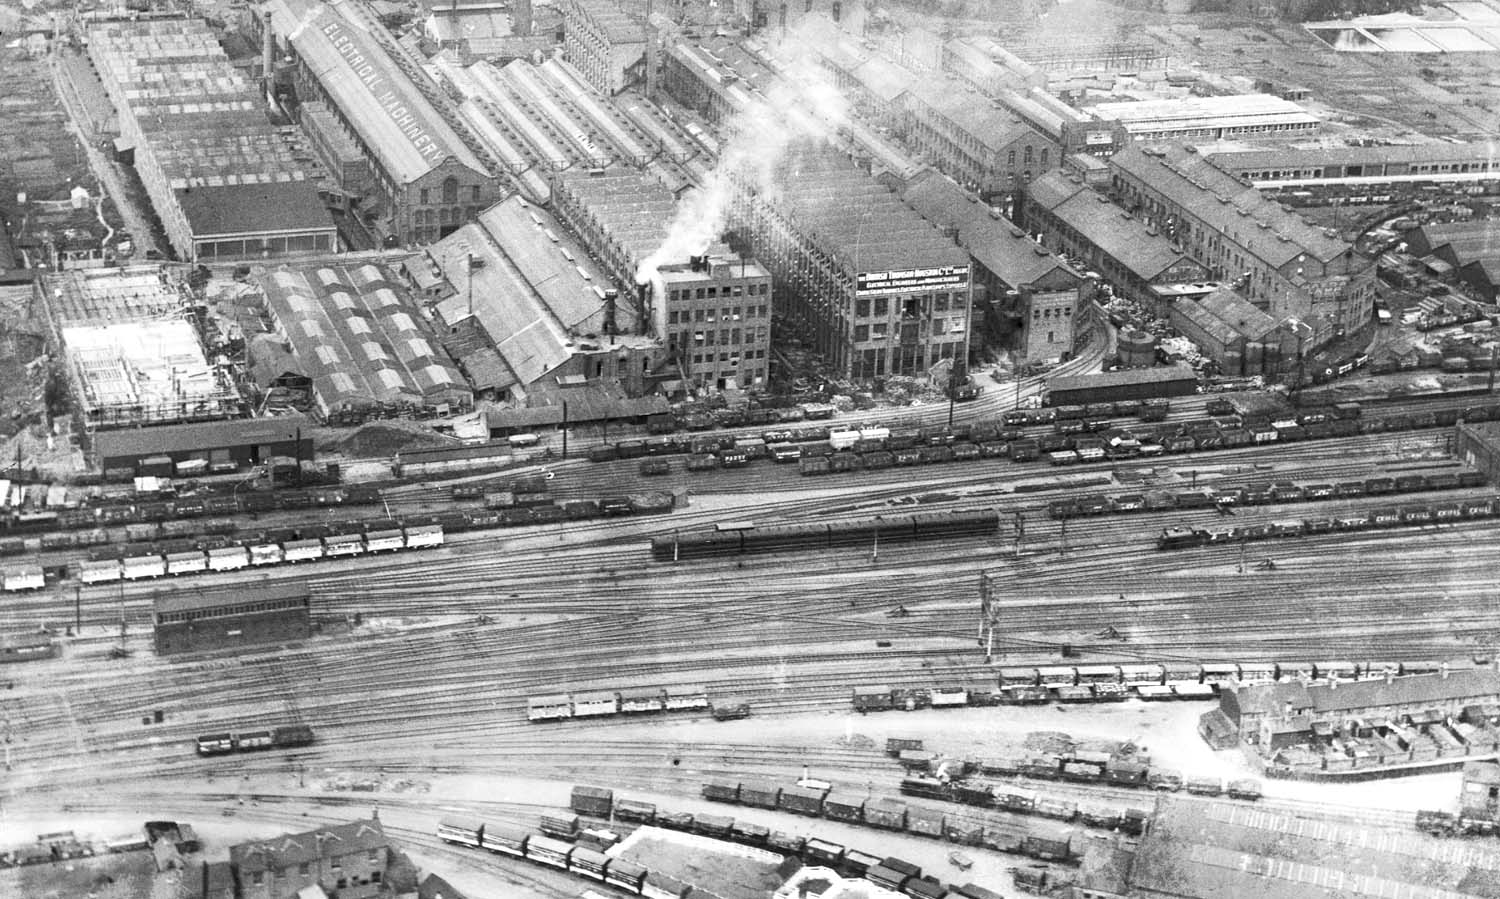 A 1920 aerial view of the immediate northern approach to Rugby station with No 5 Signal Cabin on the left, the entrance to the goods yard lower right and and BTH in the background